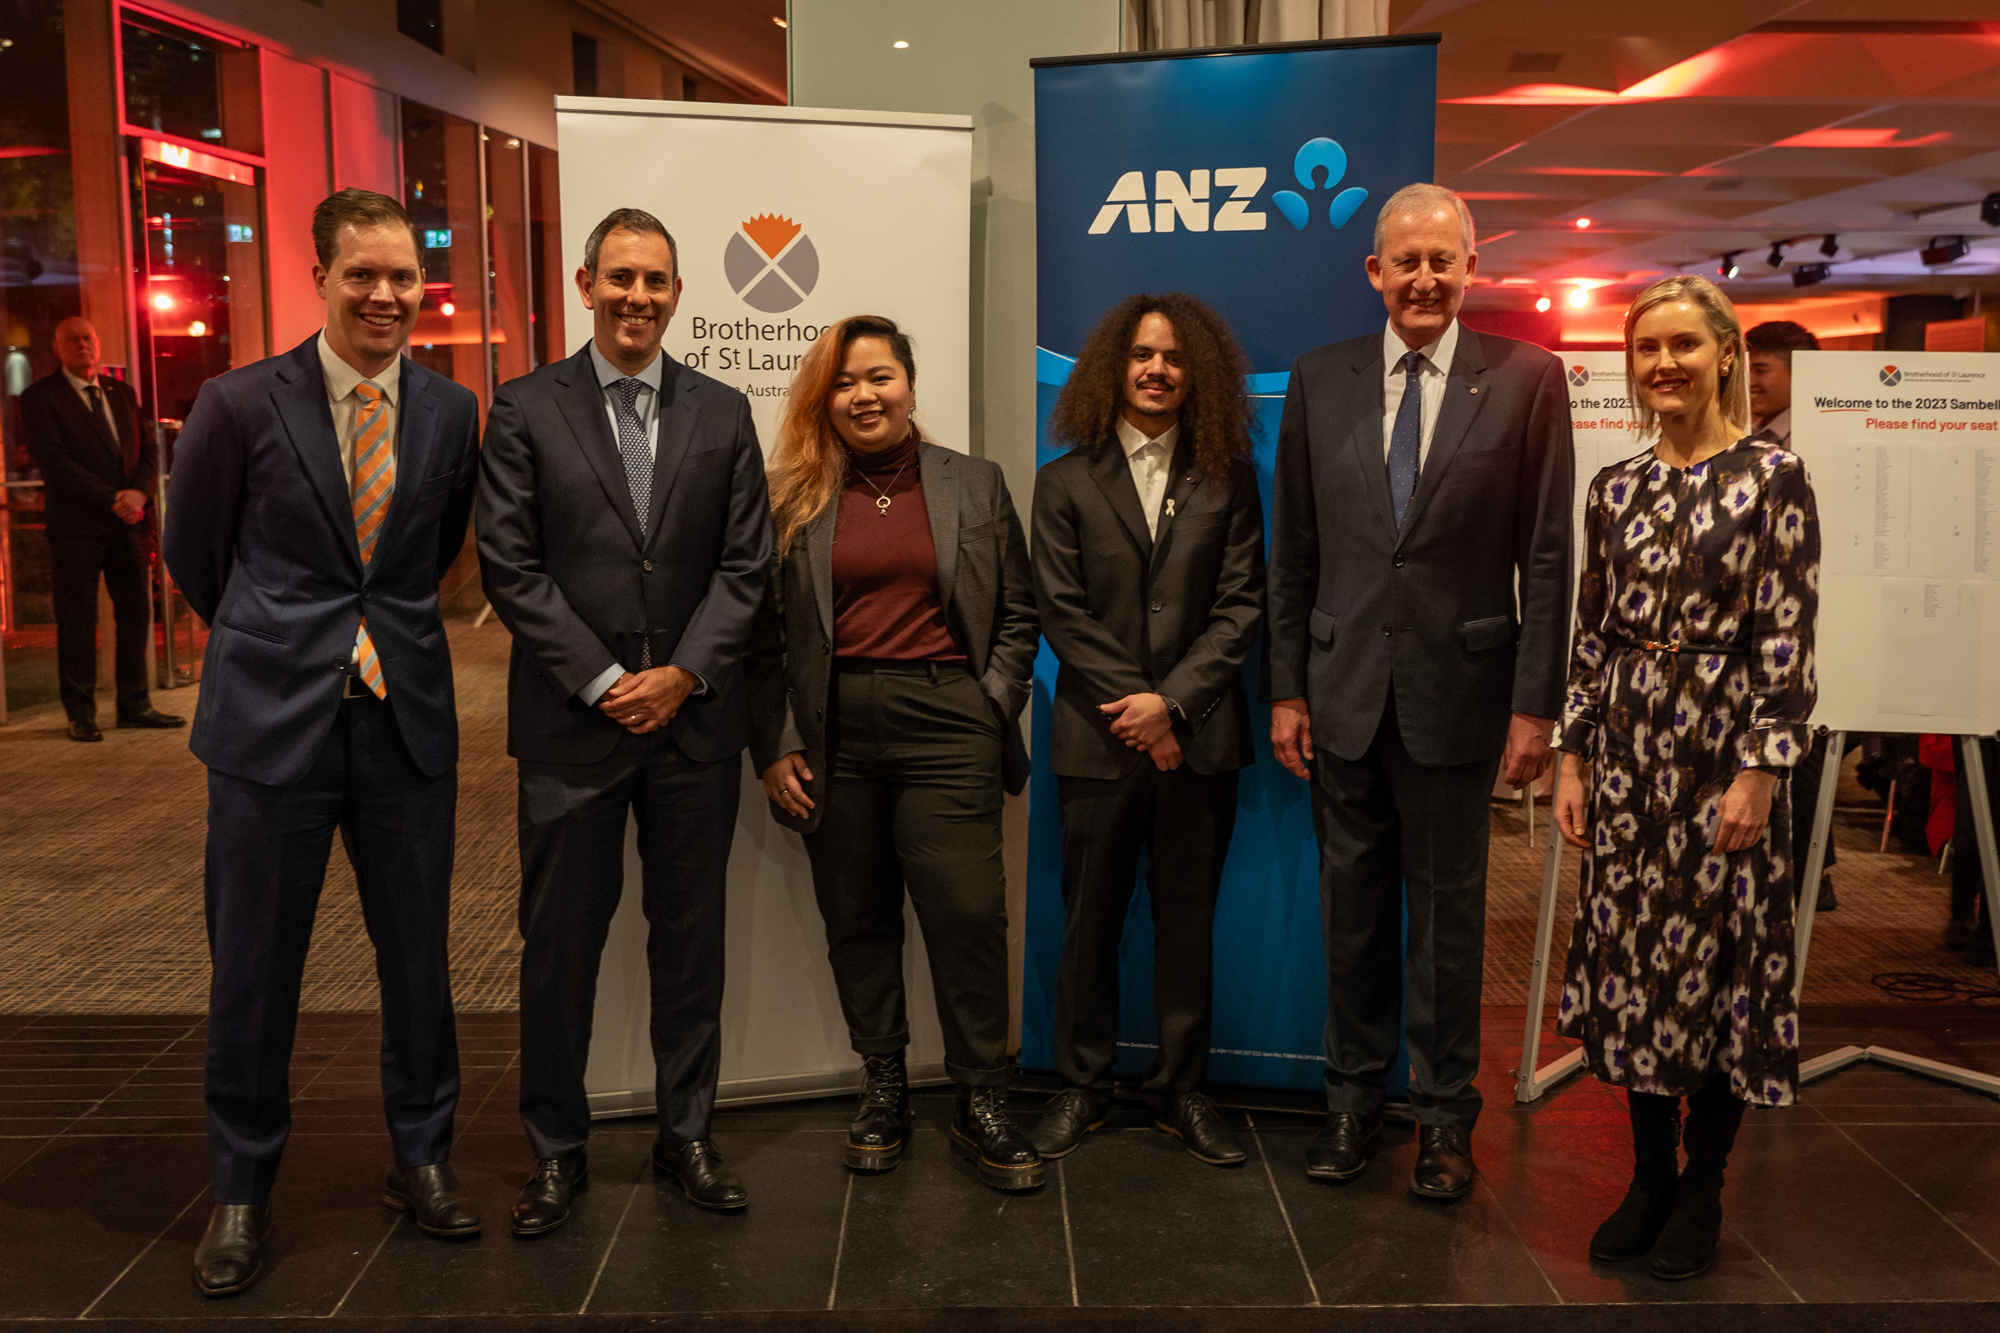 From left: BSL Executive Director Trav Mcleod, Treasurer the Hon Jim Chalmers MP, Board Chair Stephen Newton and Clare Morgan, ANZ’s Group Executive Australia Commercial. They arestanding in front of the BSL and ANZ banners smiling at the camera